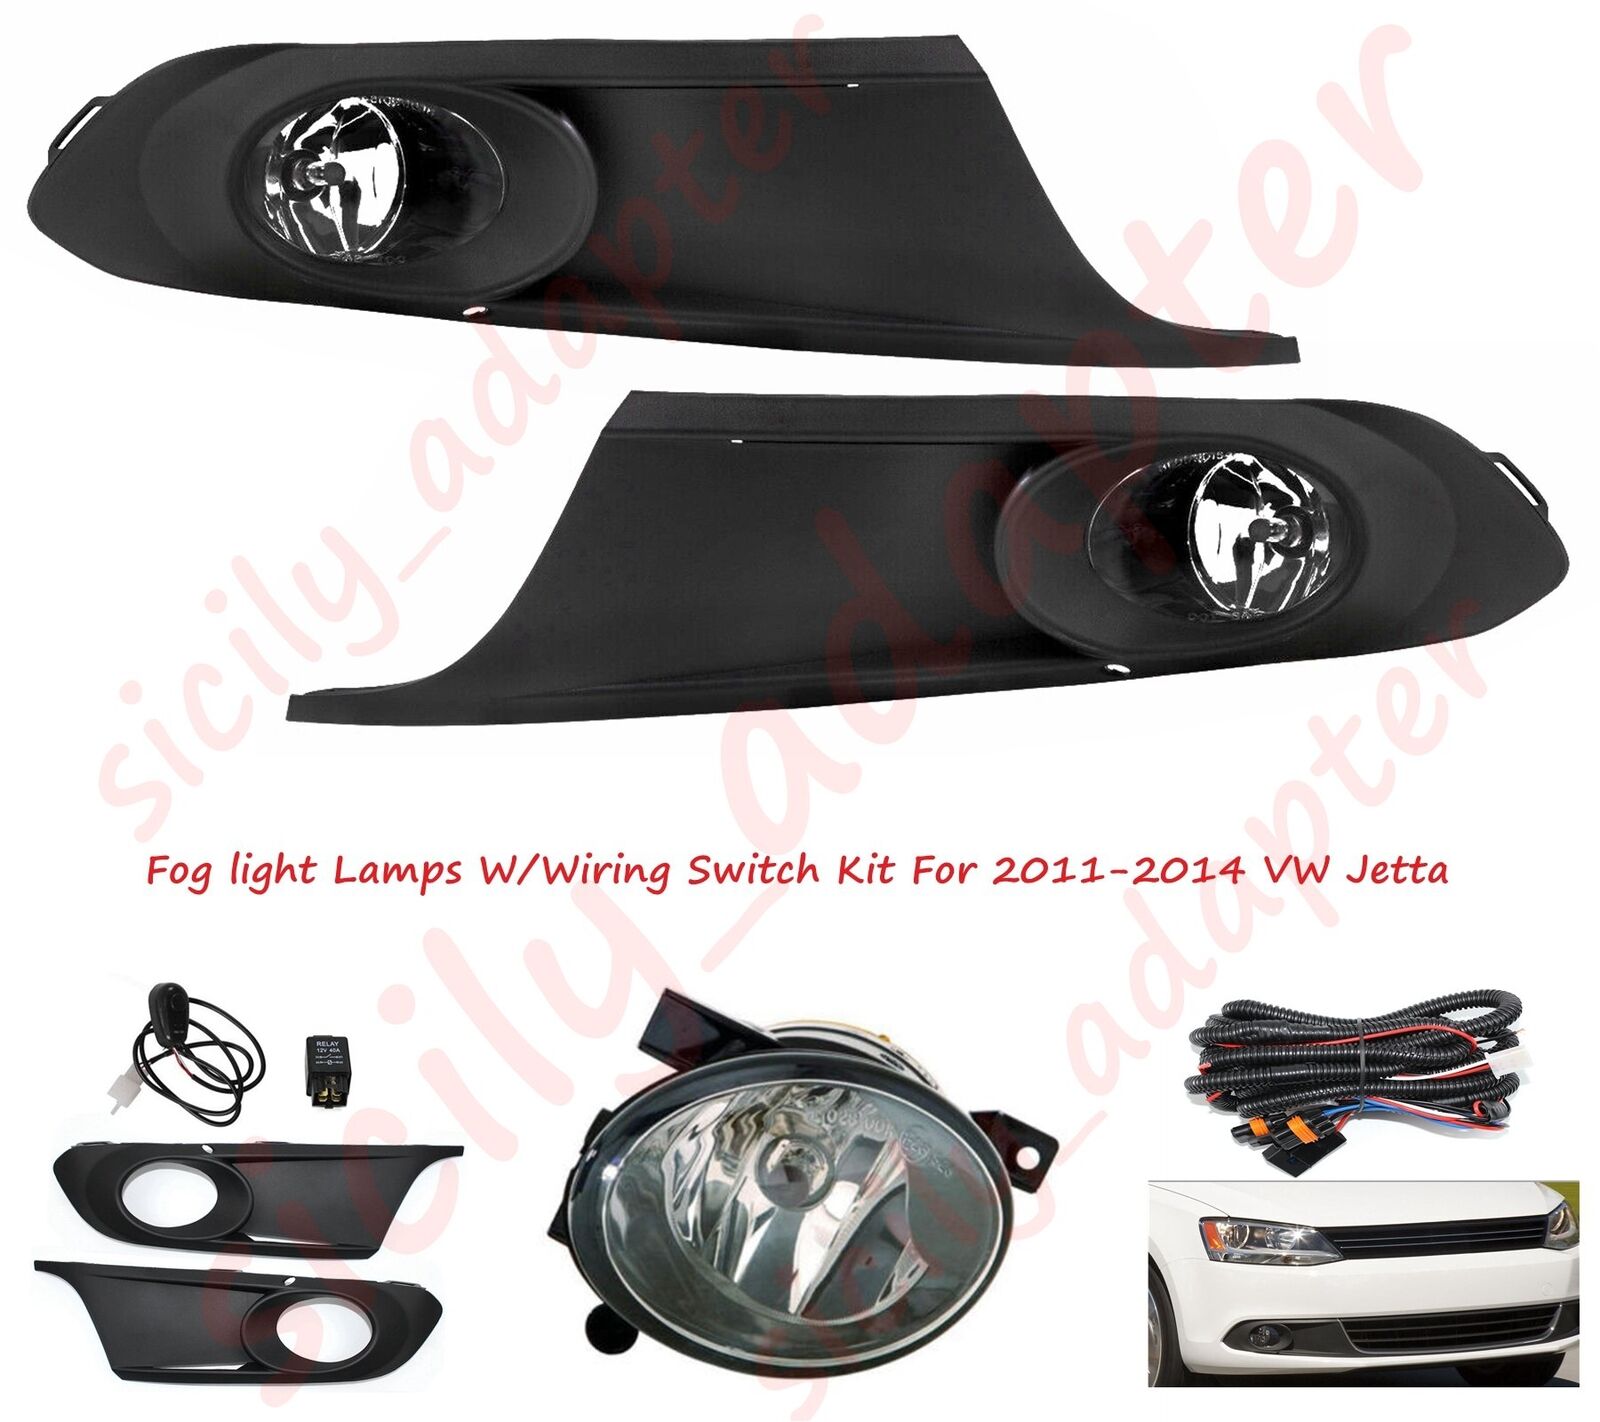 Clear Bumper Fog Lights Driving Lamps W/Wiring Switch Kit For 2011-2014 VW Jetta